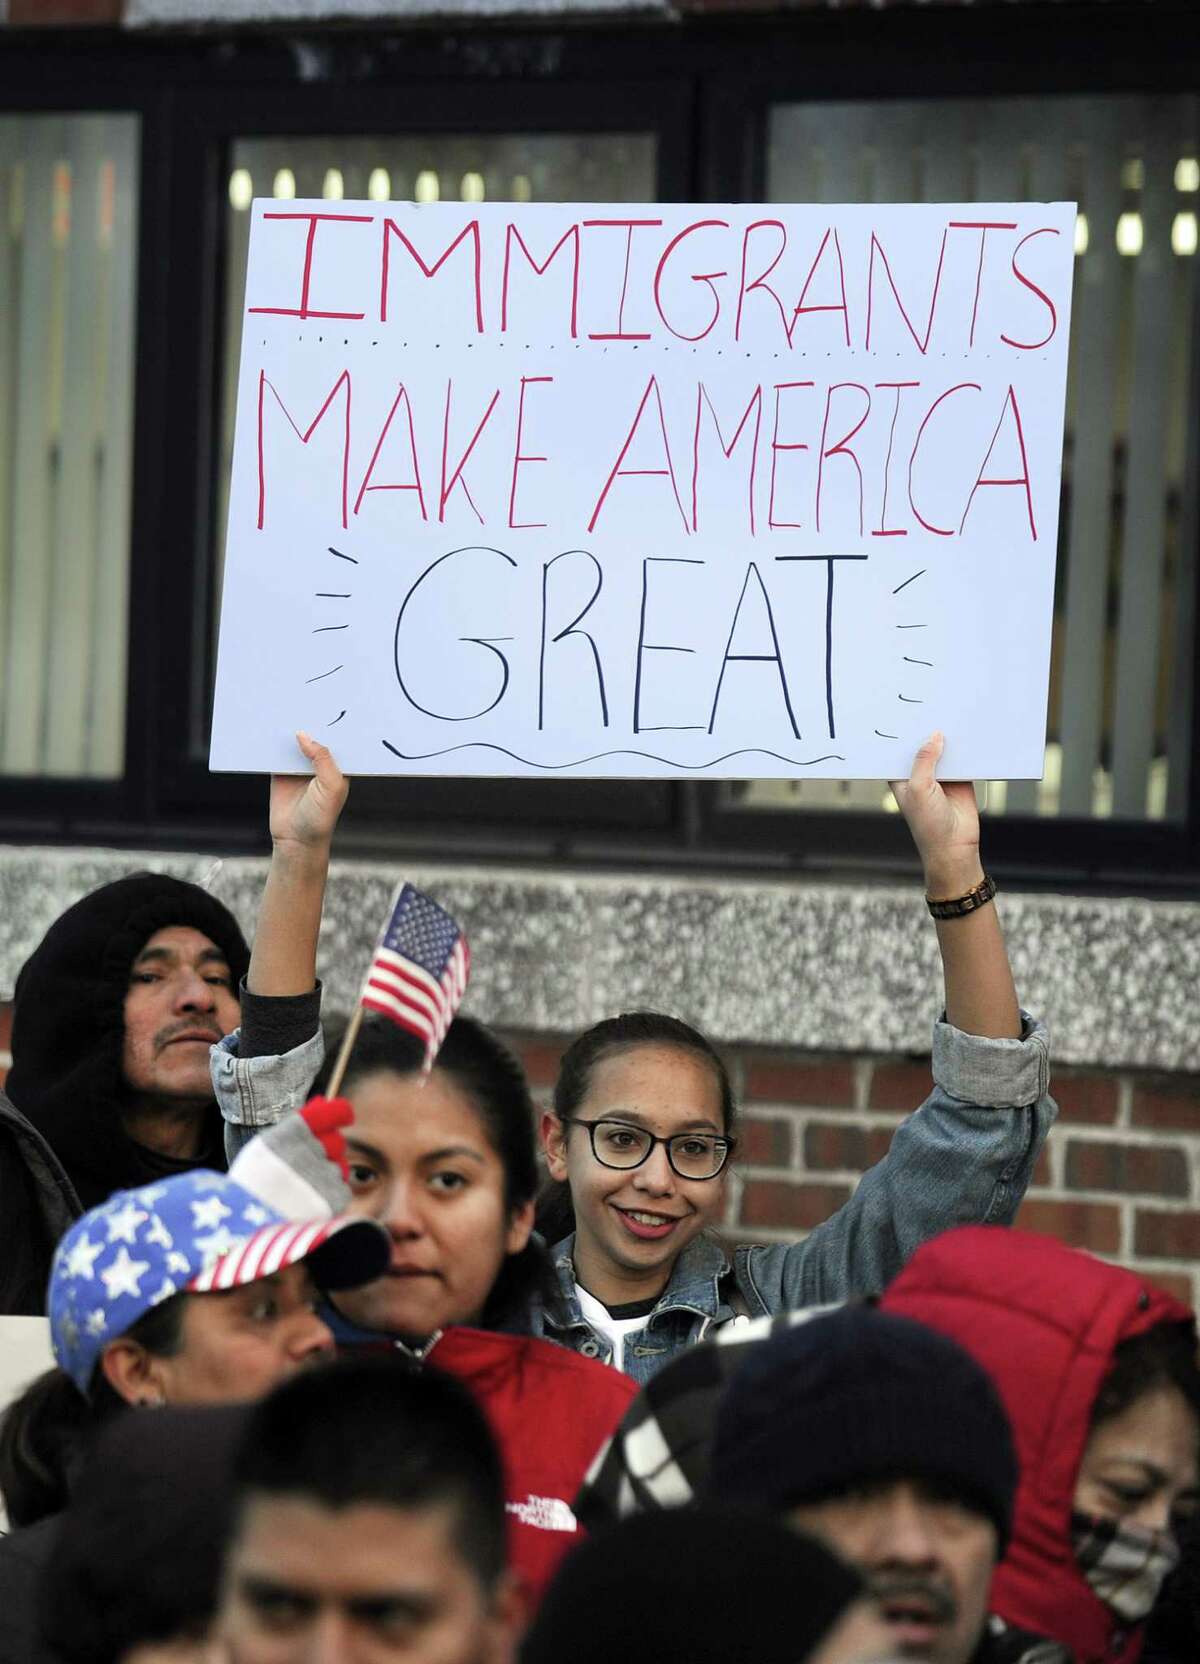 Gabby Perez, 17, of Danbury, holds a "Immigrants make America great" sign at a "Day without immigrants" rally at the Danbury City Hall Thursday, February 16, 2017.